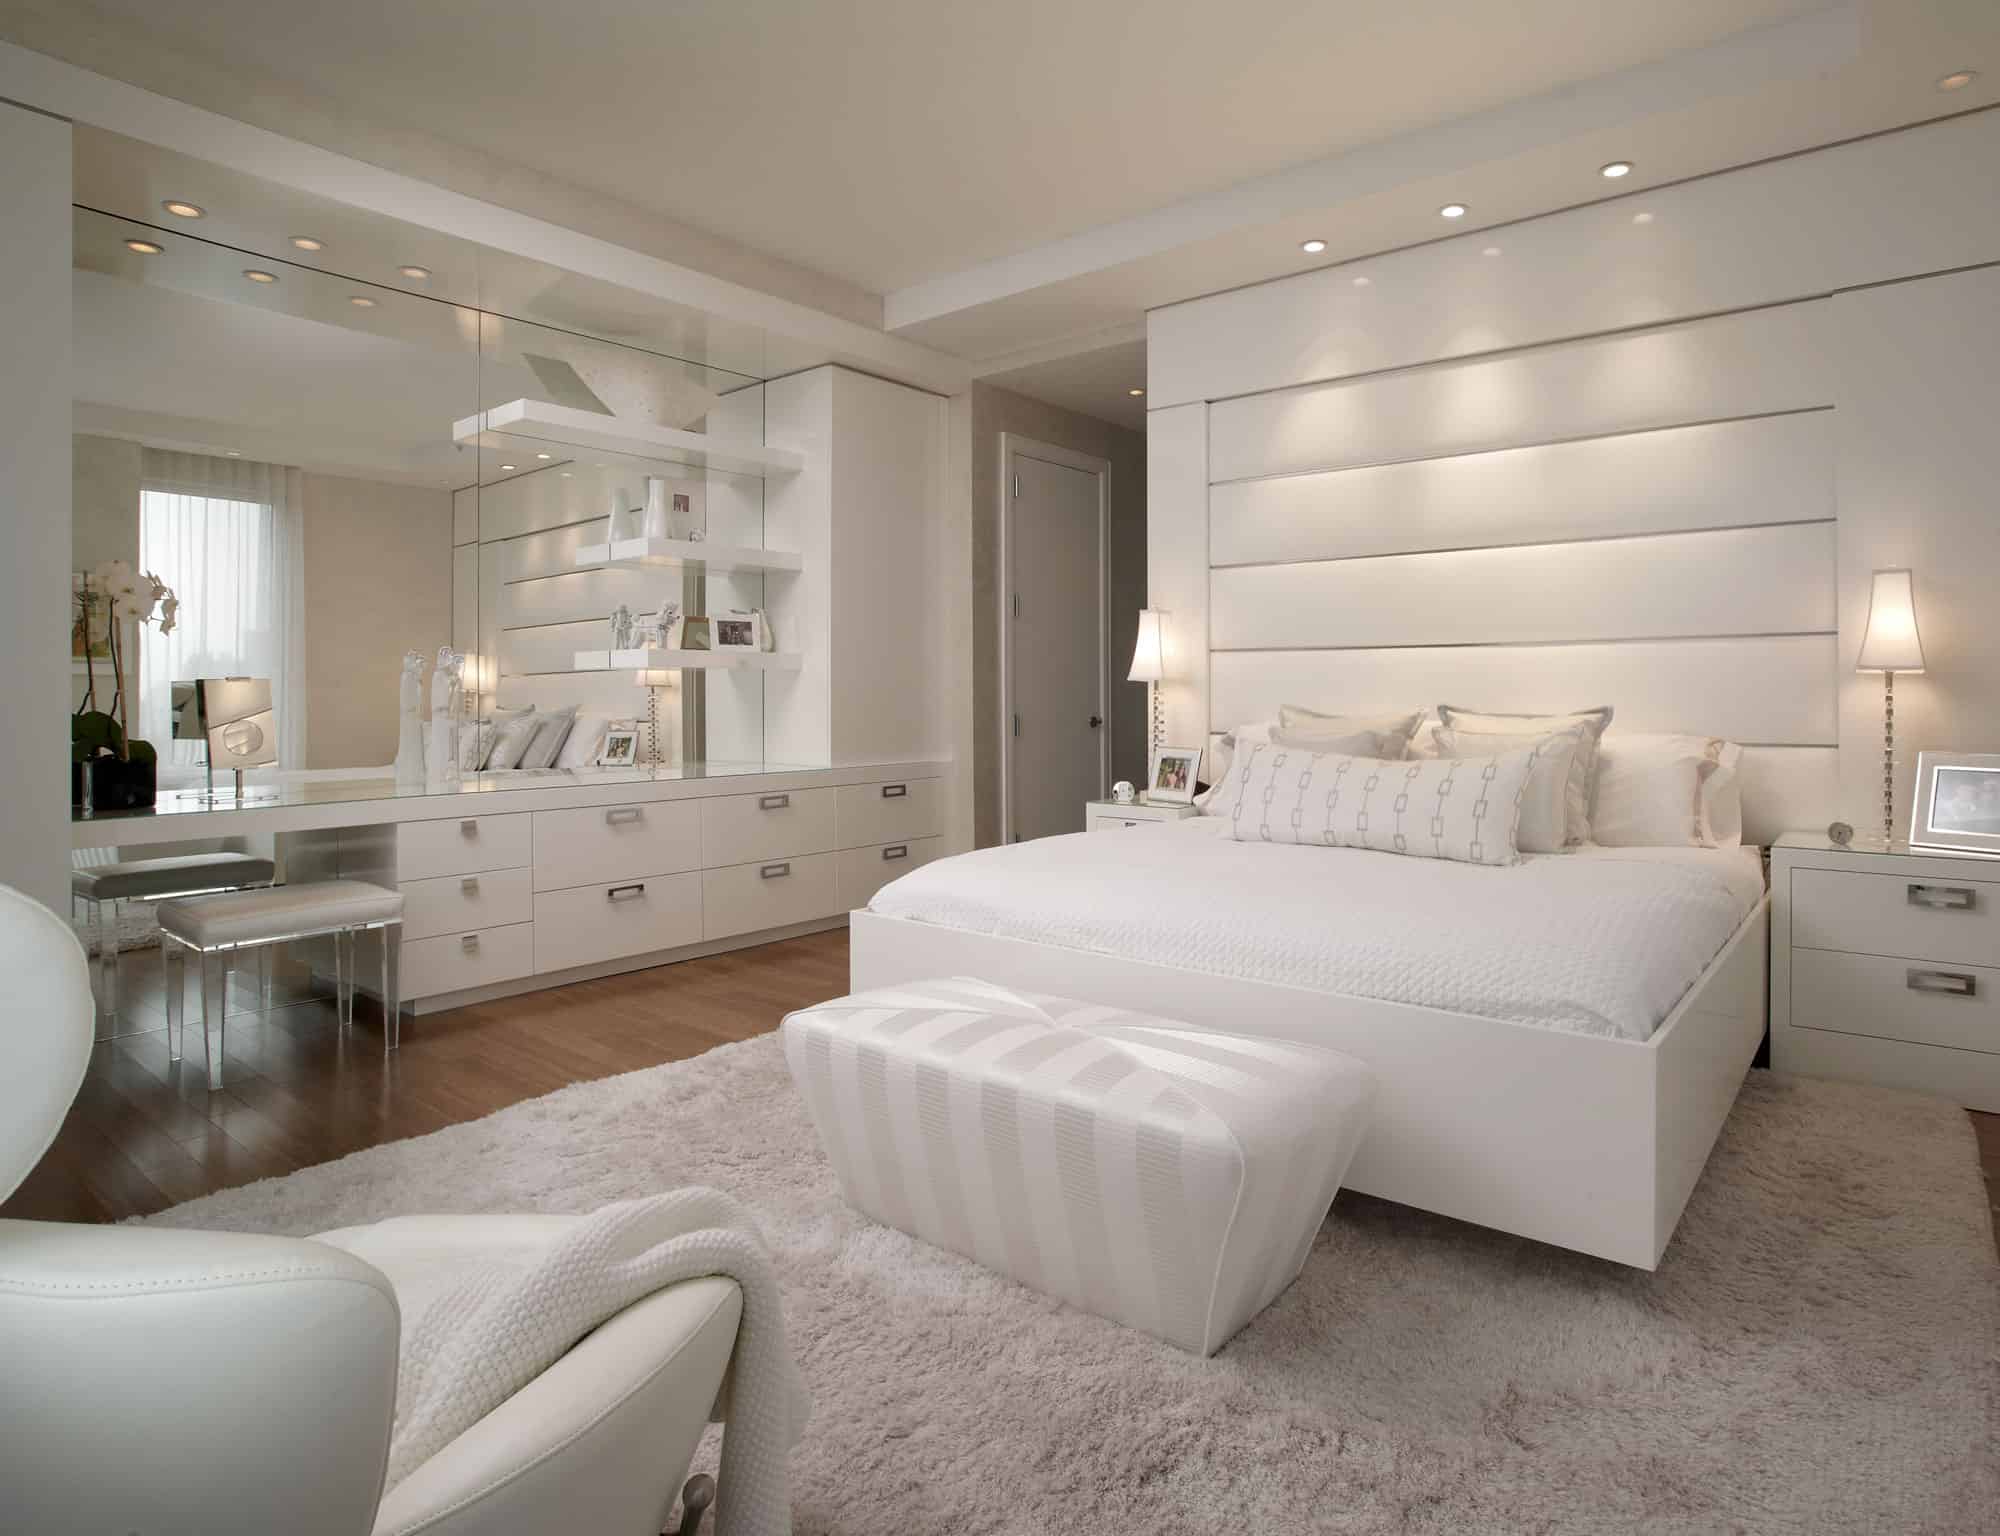 Small master bedroom? Here’s how to make the most of it